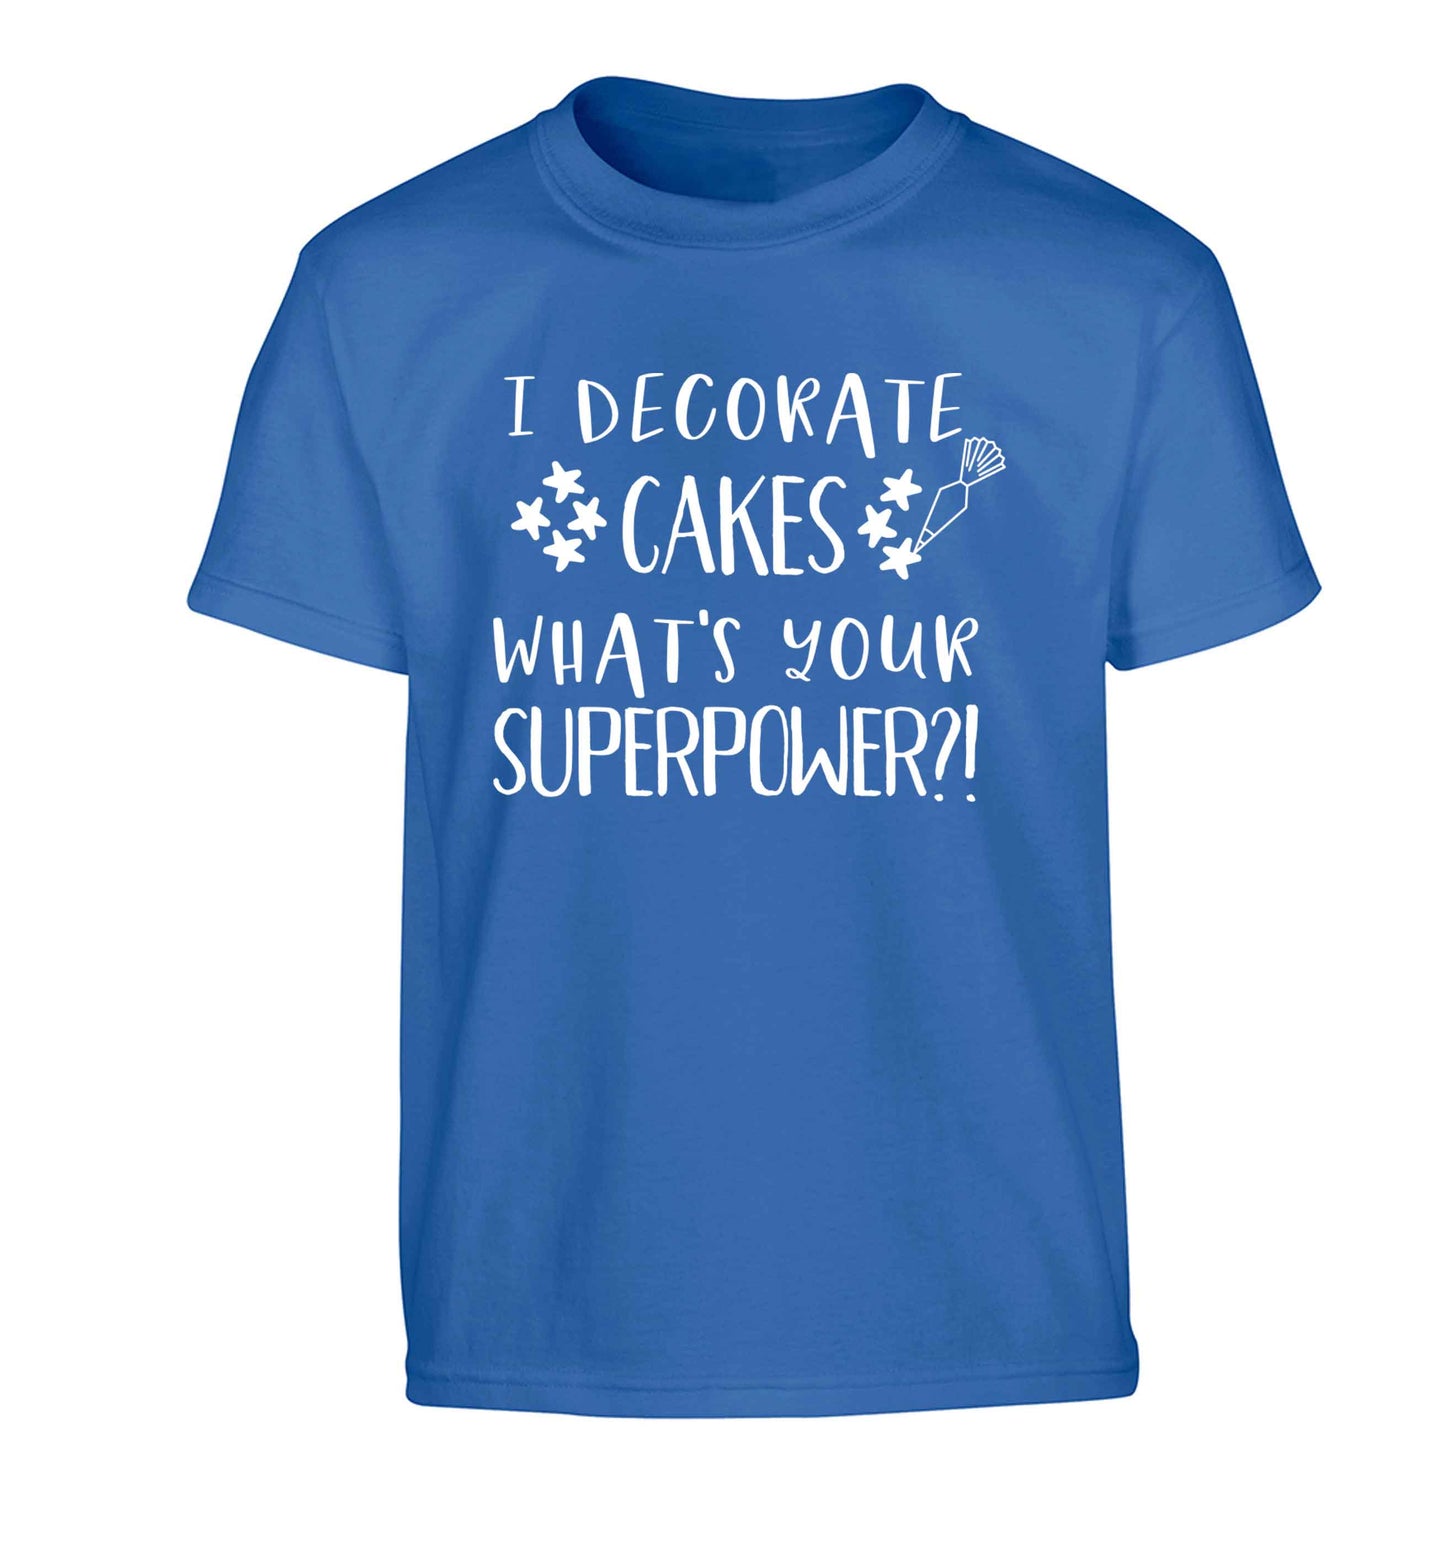 I decorate cakes what's your superpower?! Children's blue Tshirt 12-13 Years